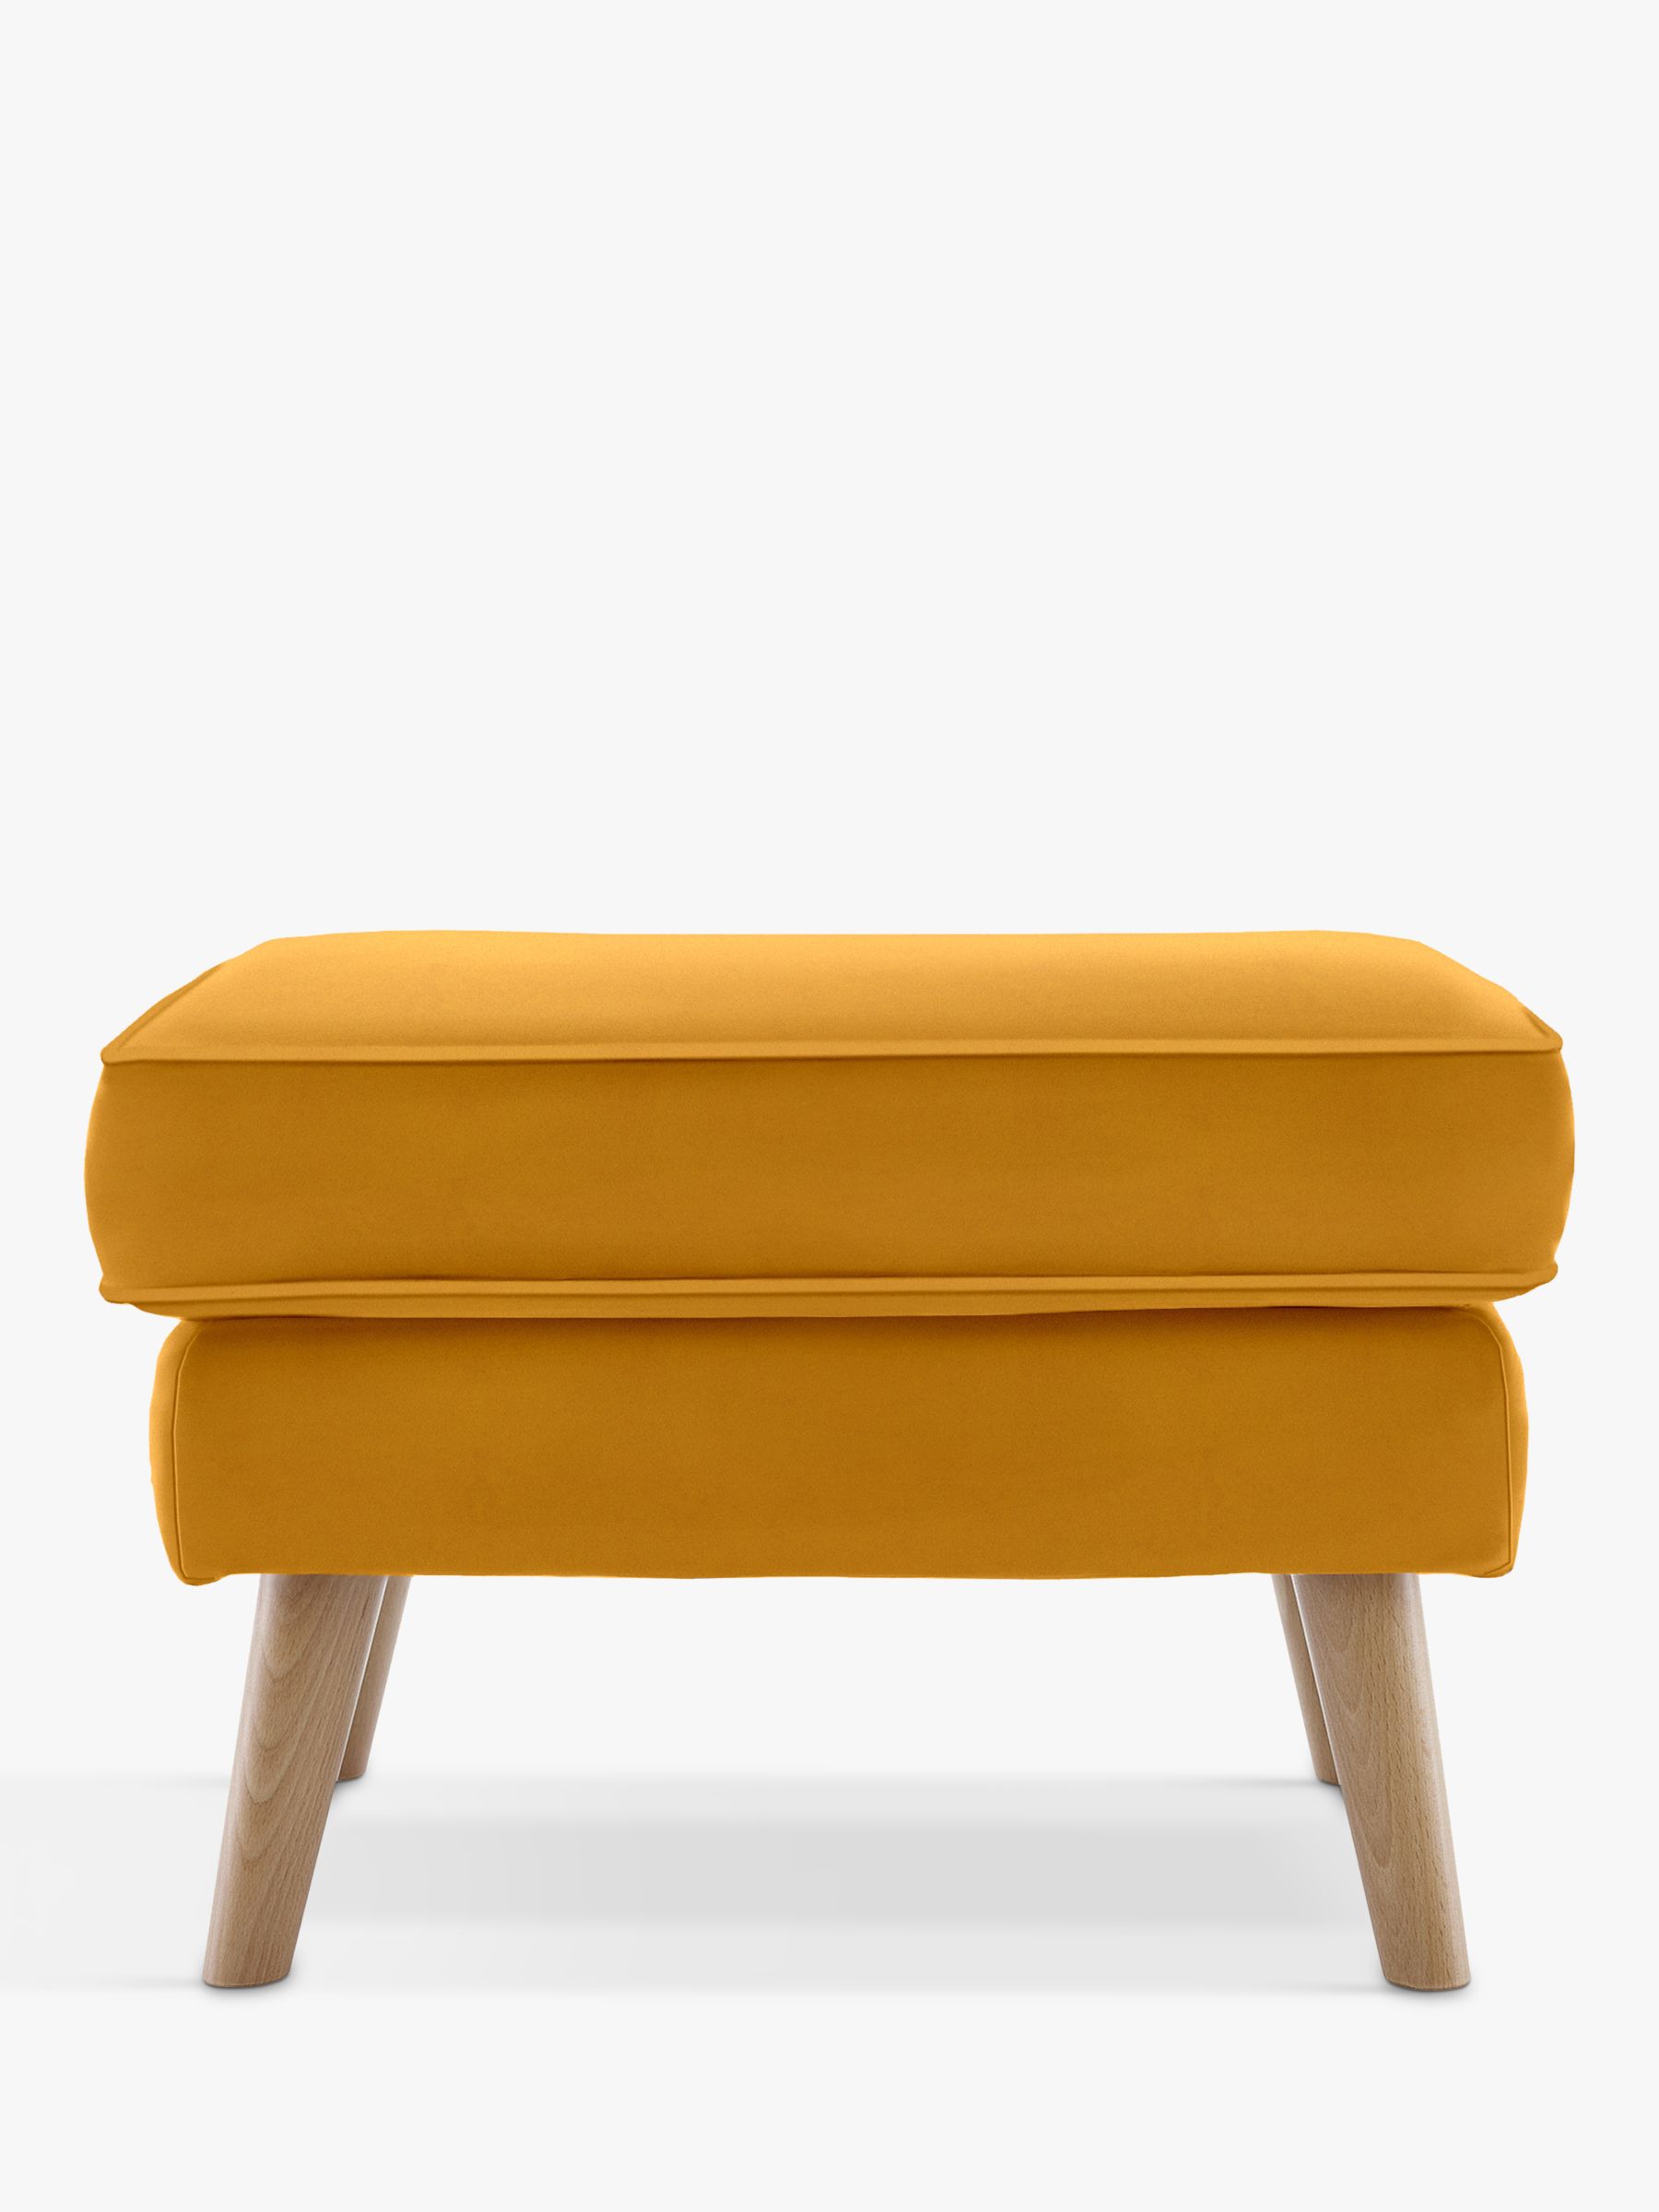 G Plan Vintage The Sixty Five Footstool